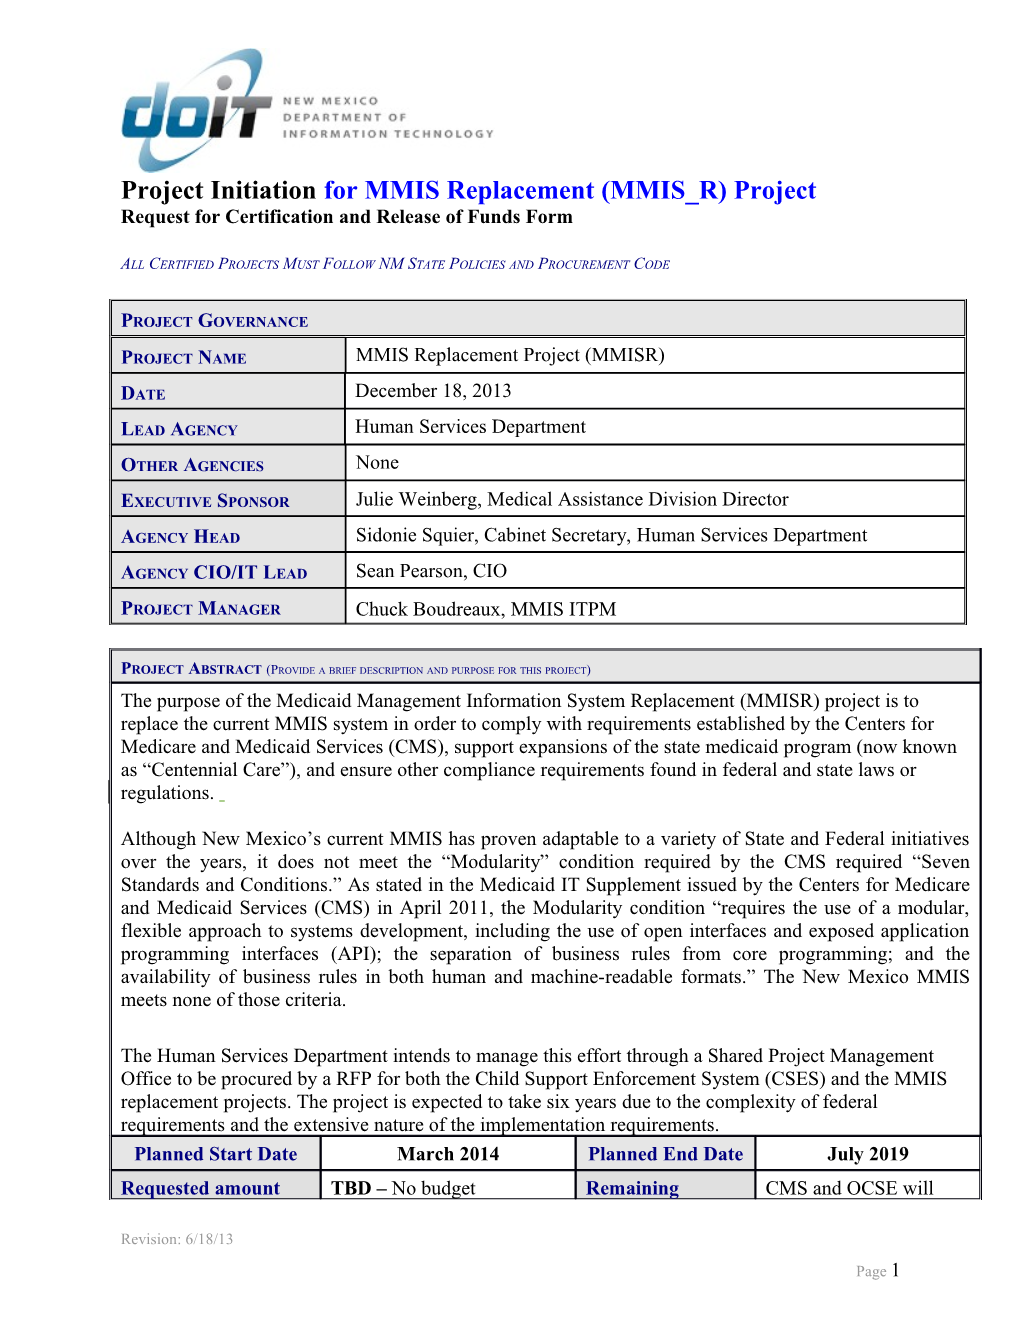 Project Initiationfor MMIS Replacement (MMIS R) Project